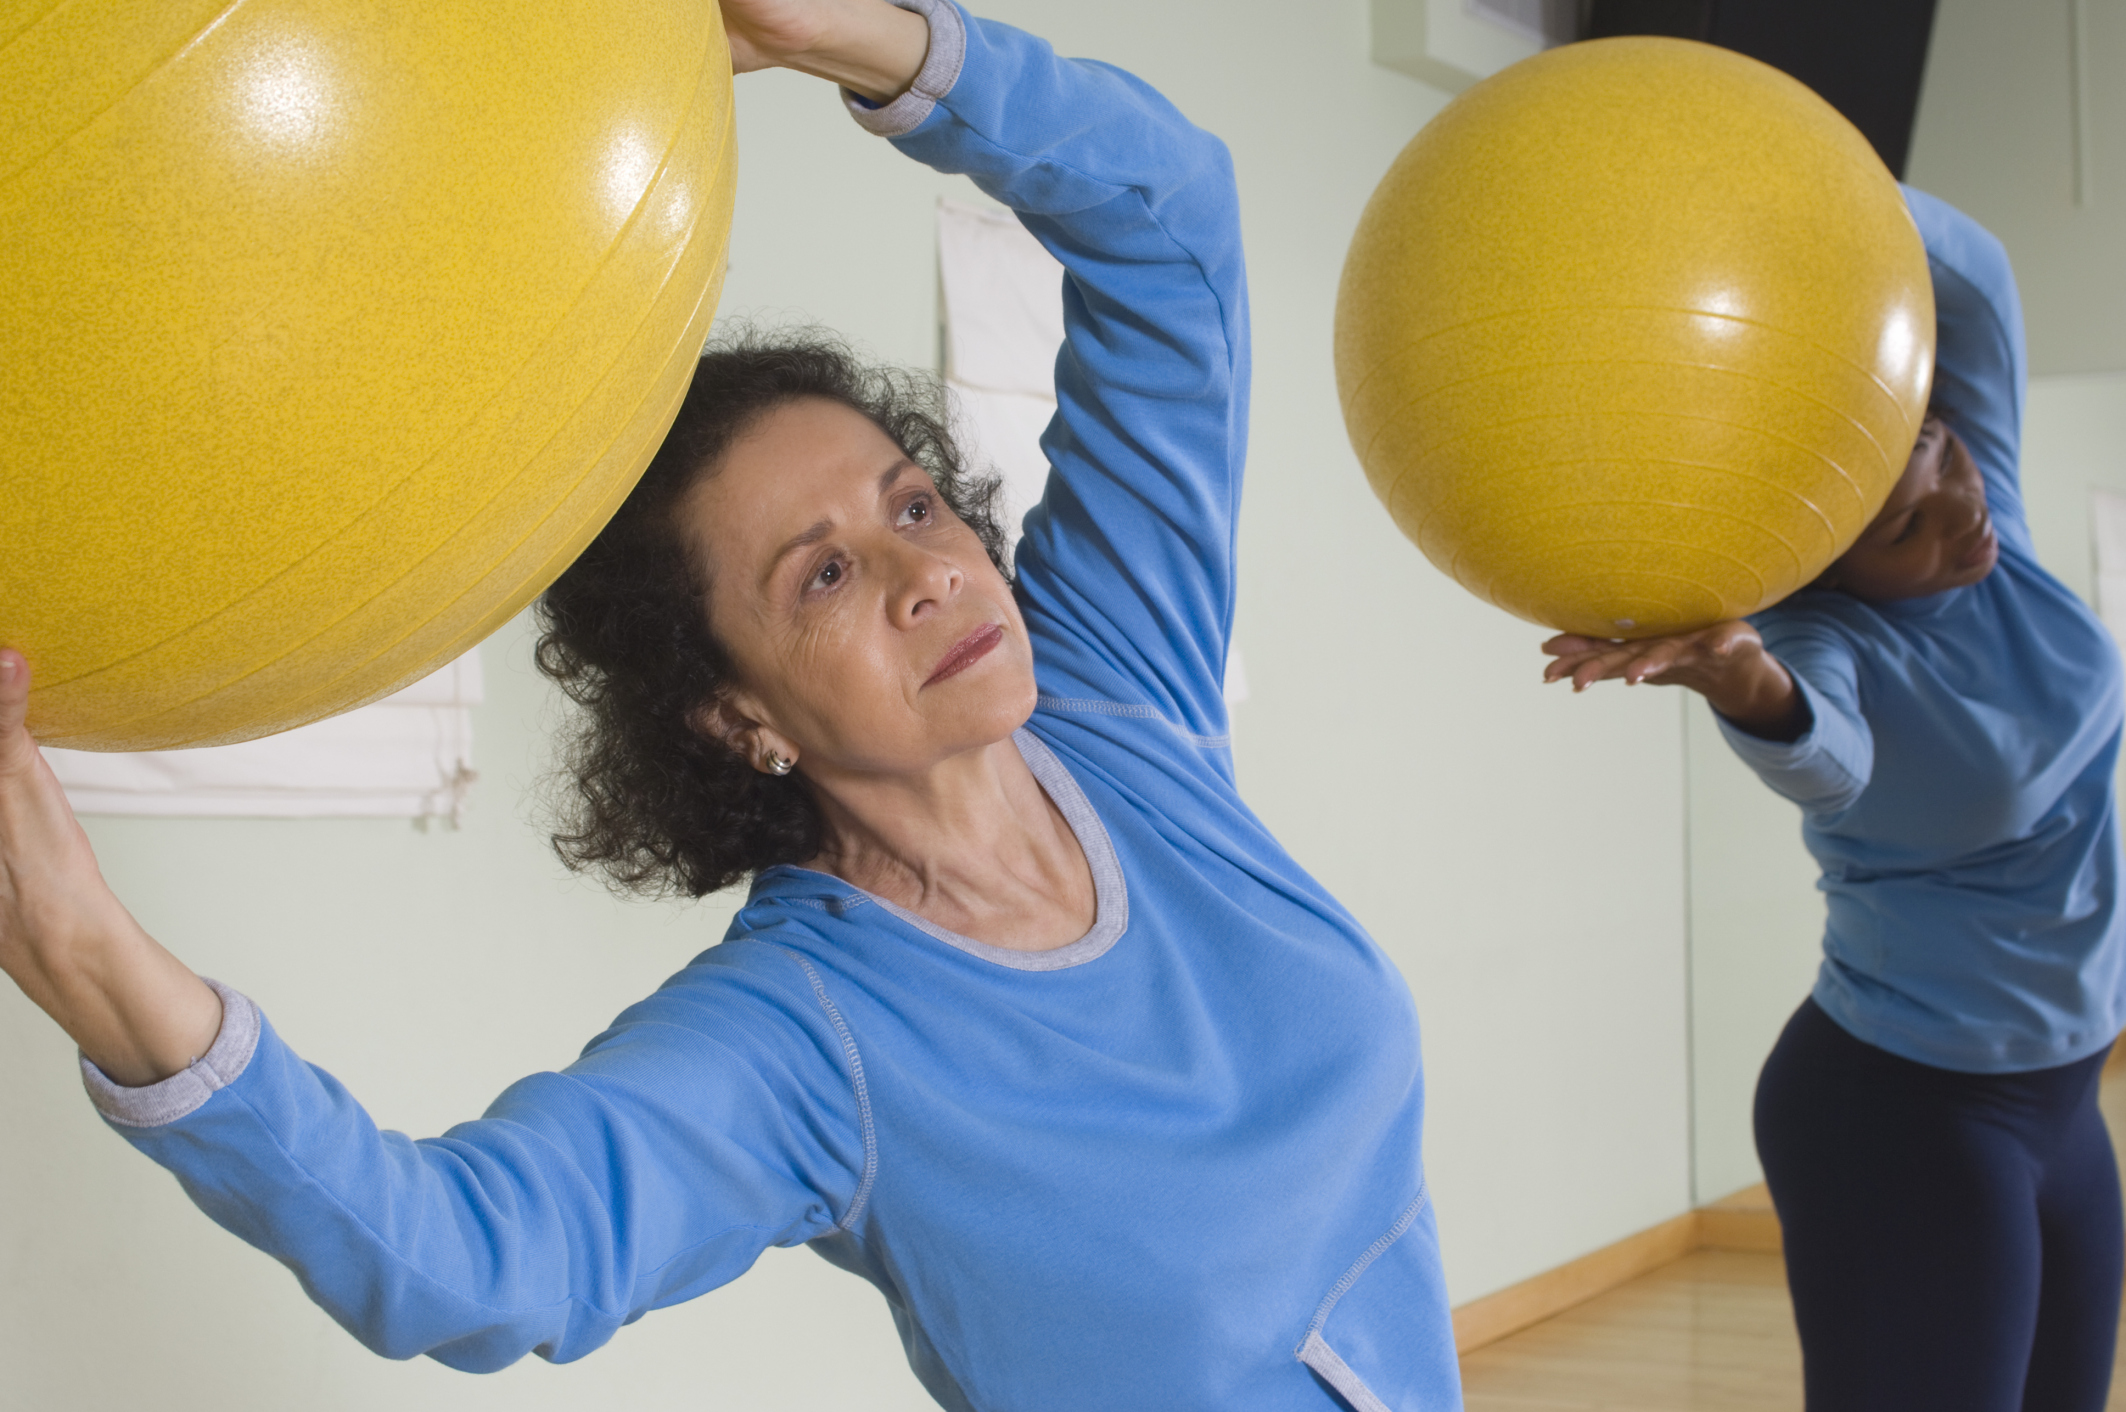 A Diet & Exercise Plan for a 60-Year-Old Woman